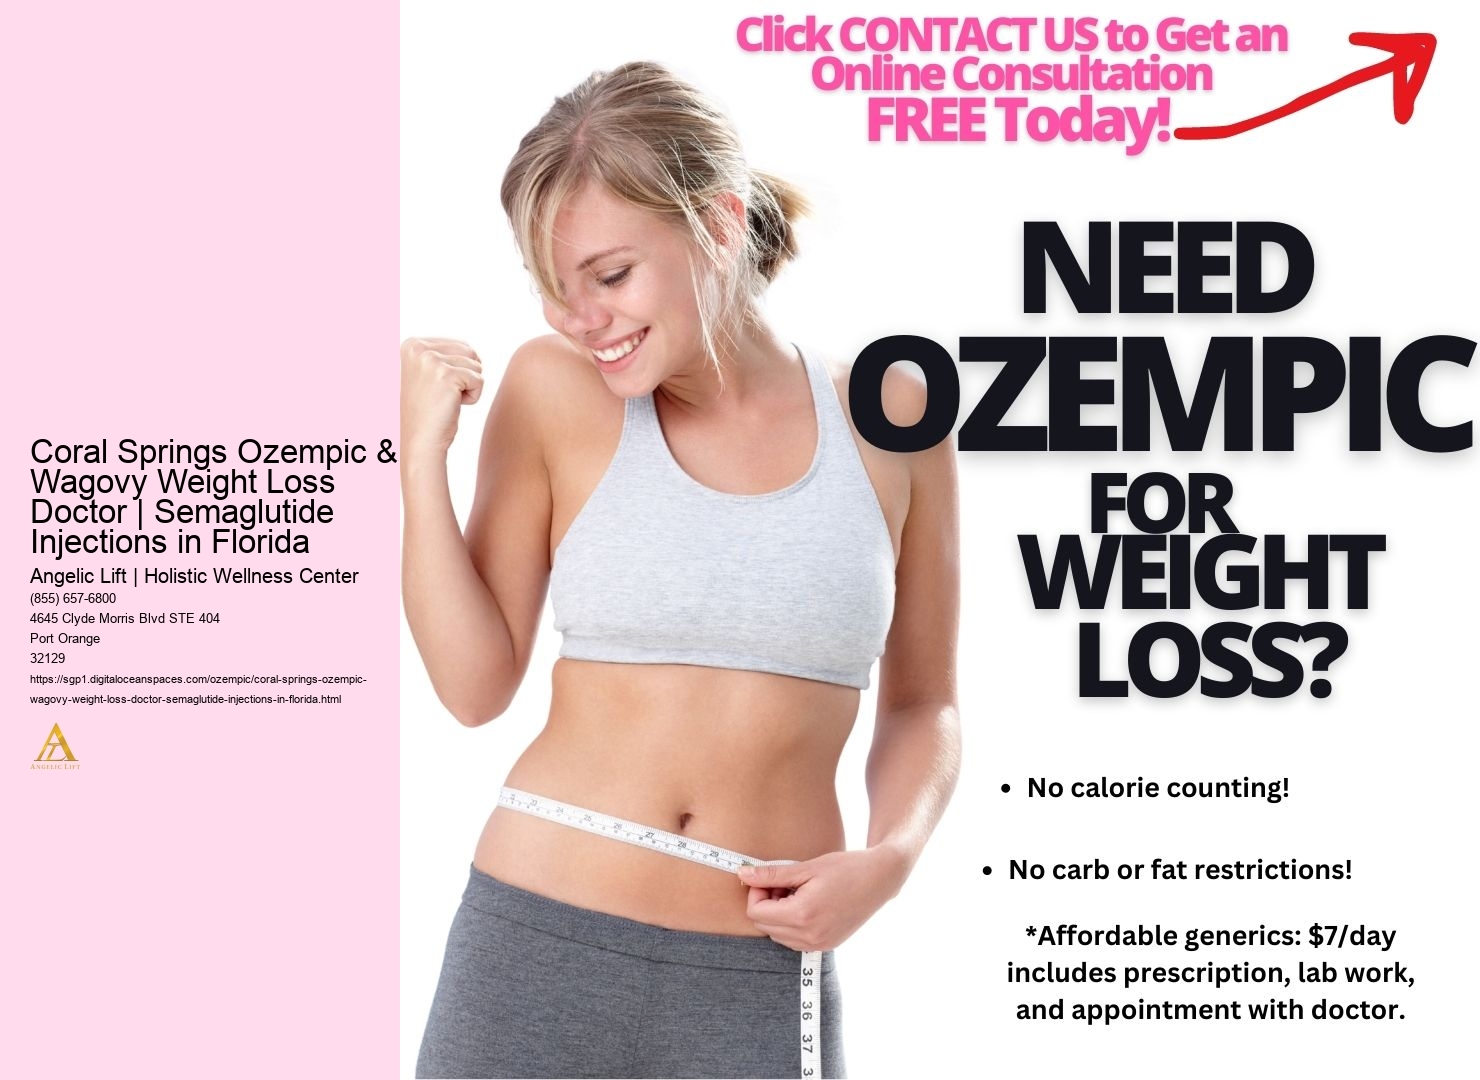 Coral Springs Ozempic & Wagovy Weight Loss Doctor | Semaglutide Injections in Florida